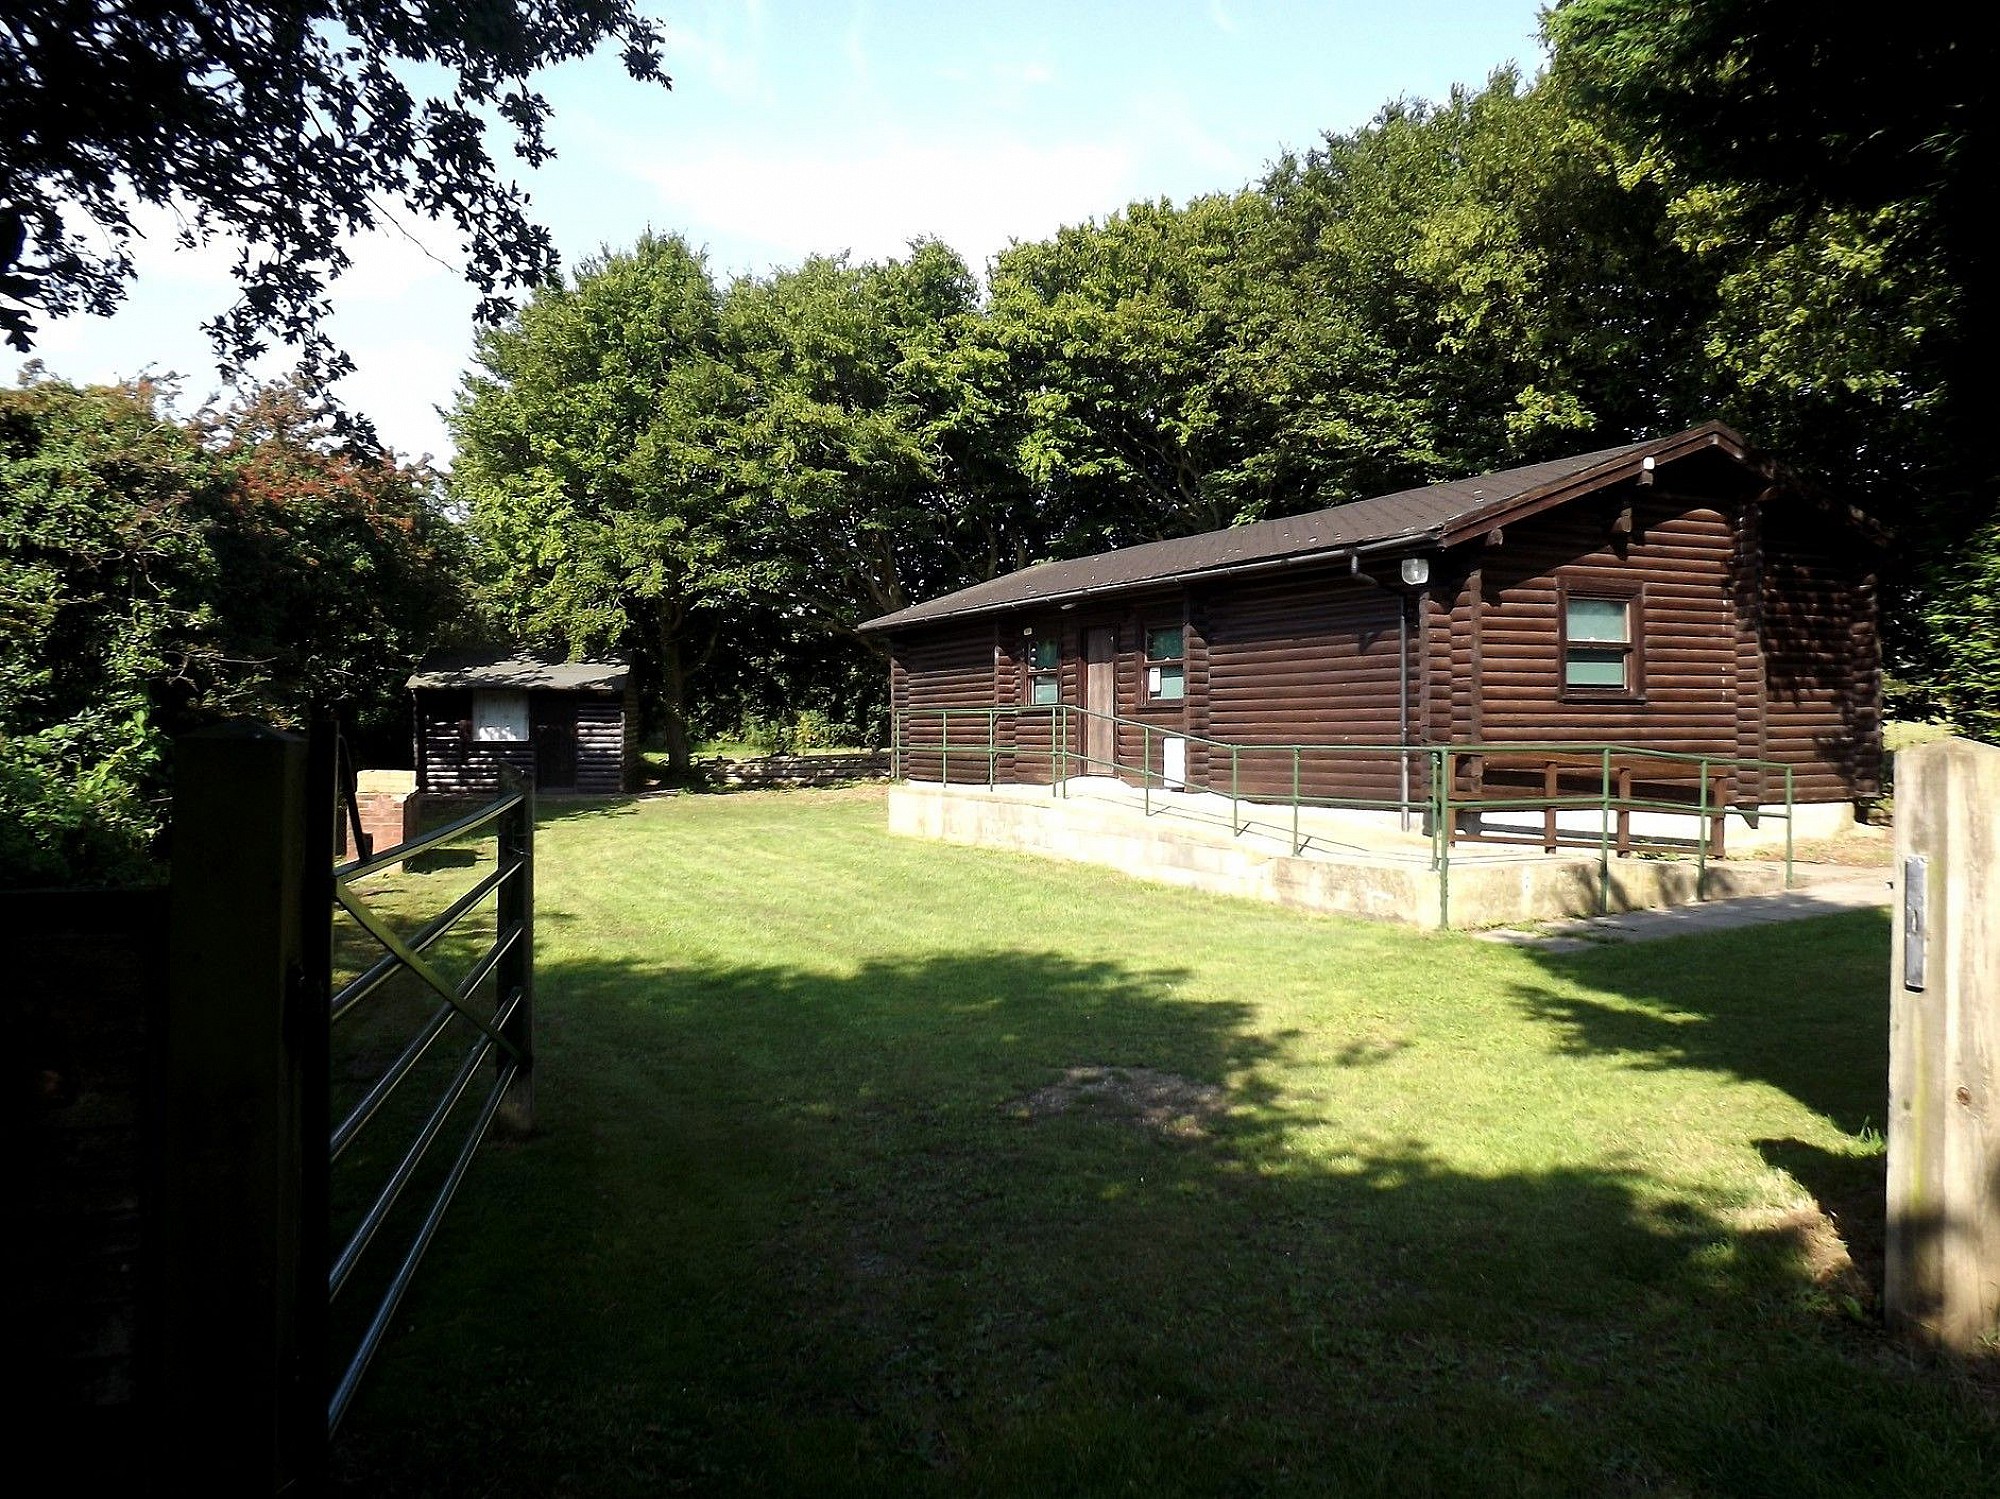 Record numbers using the Trimingham Log Cabin